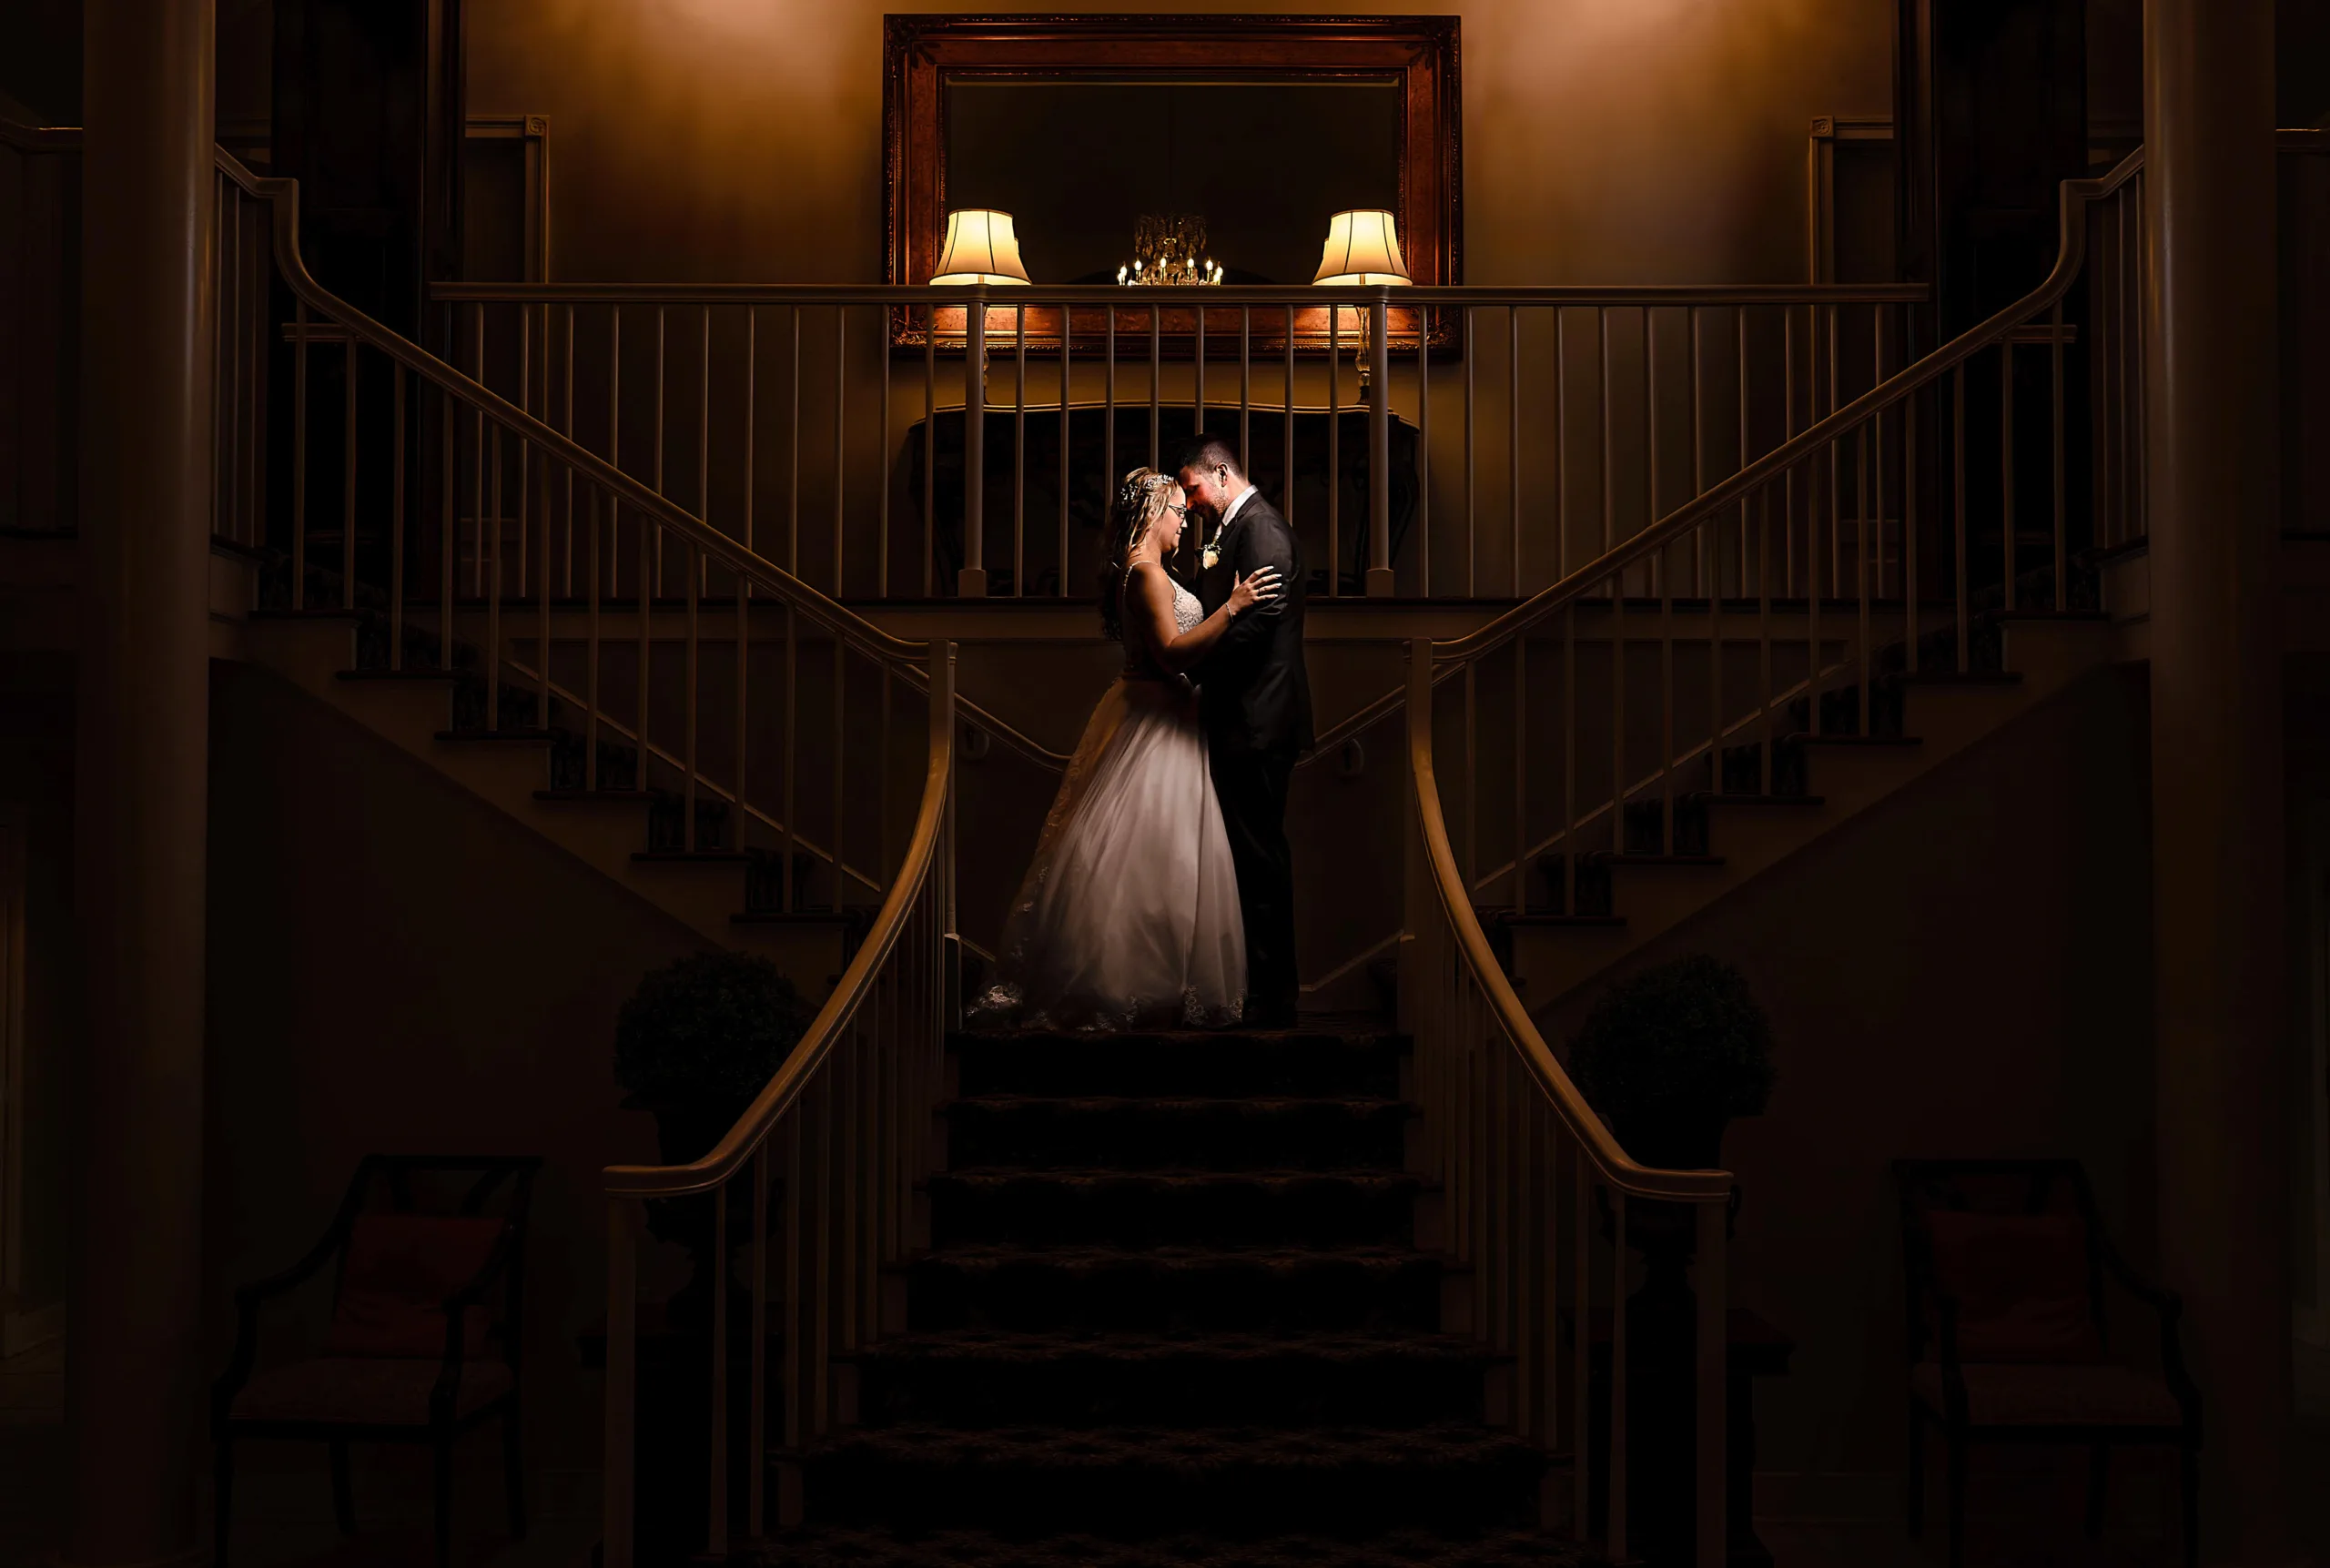 Bride and groom sharing an intimate moment on the grand staircase of the Connecticut wedding venue The Woodwinds